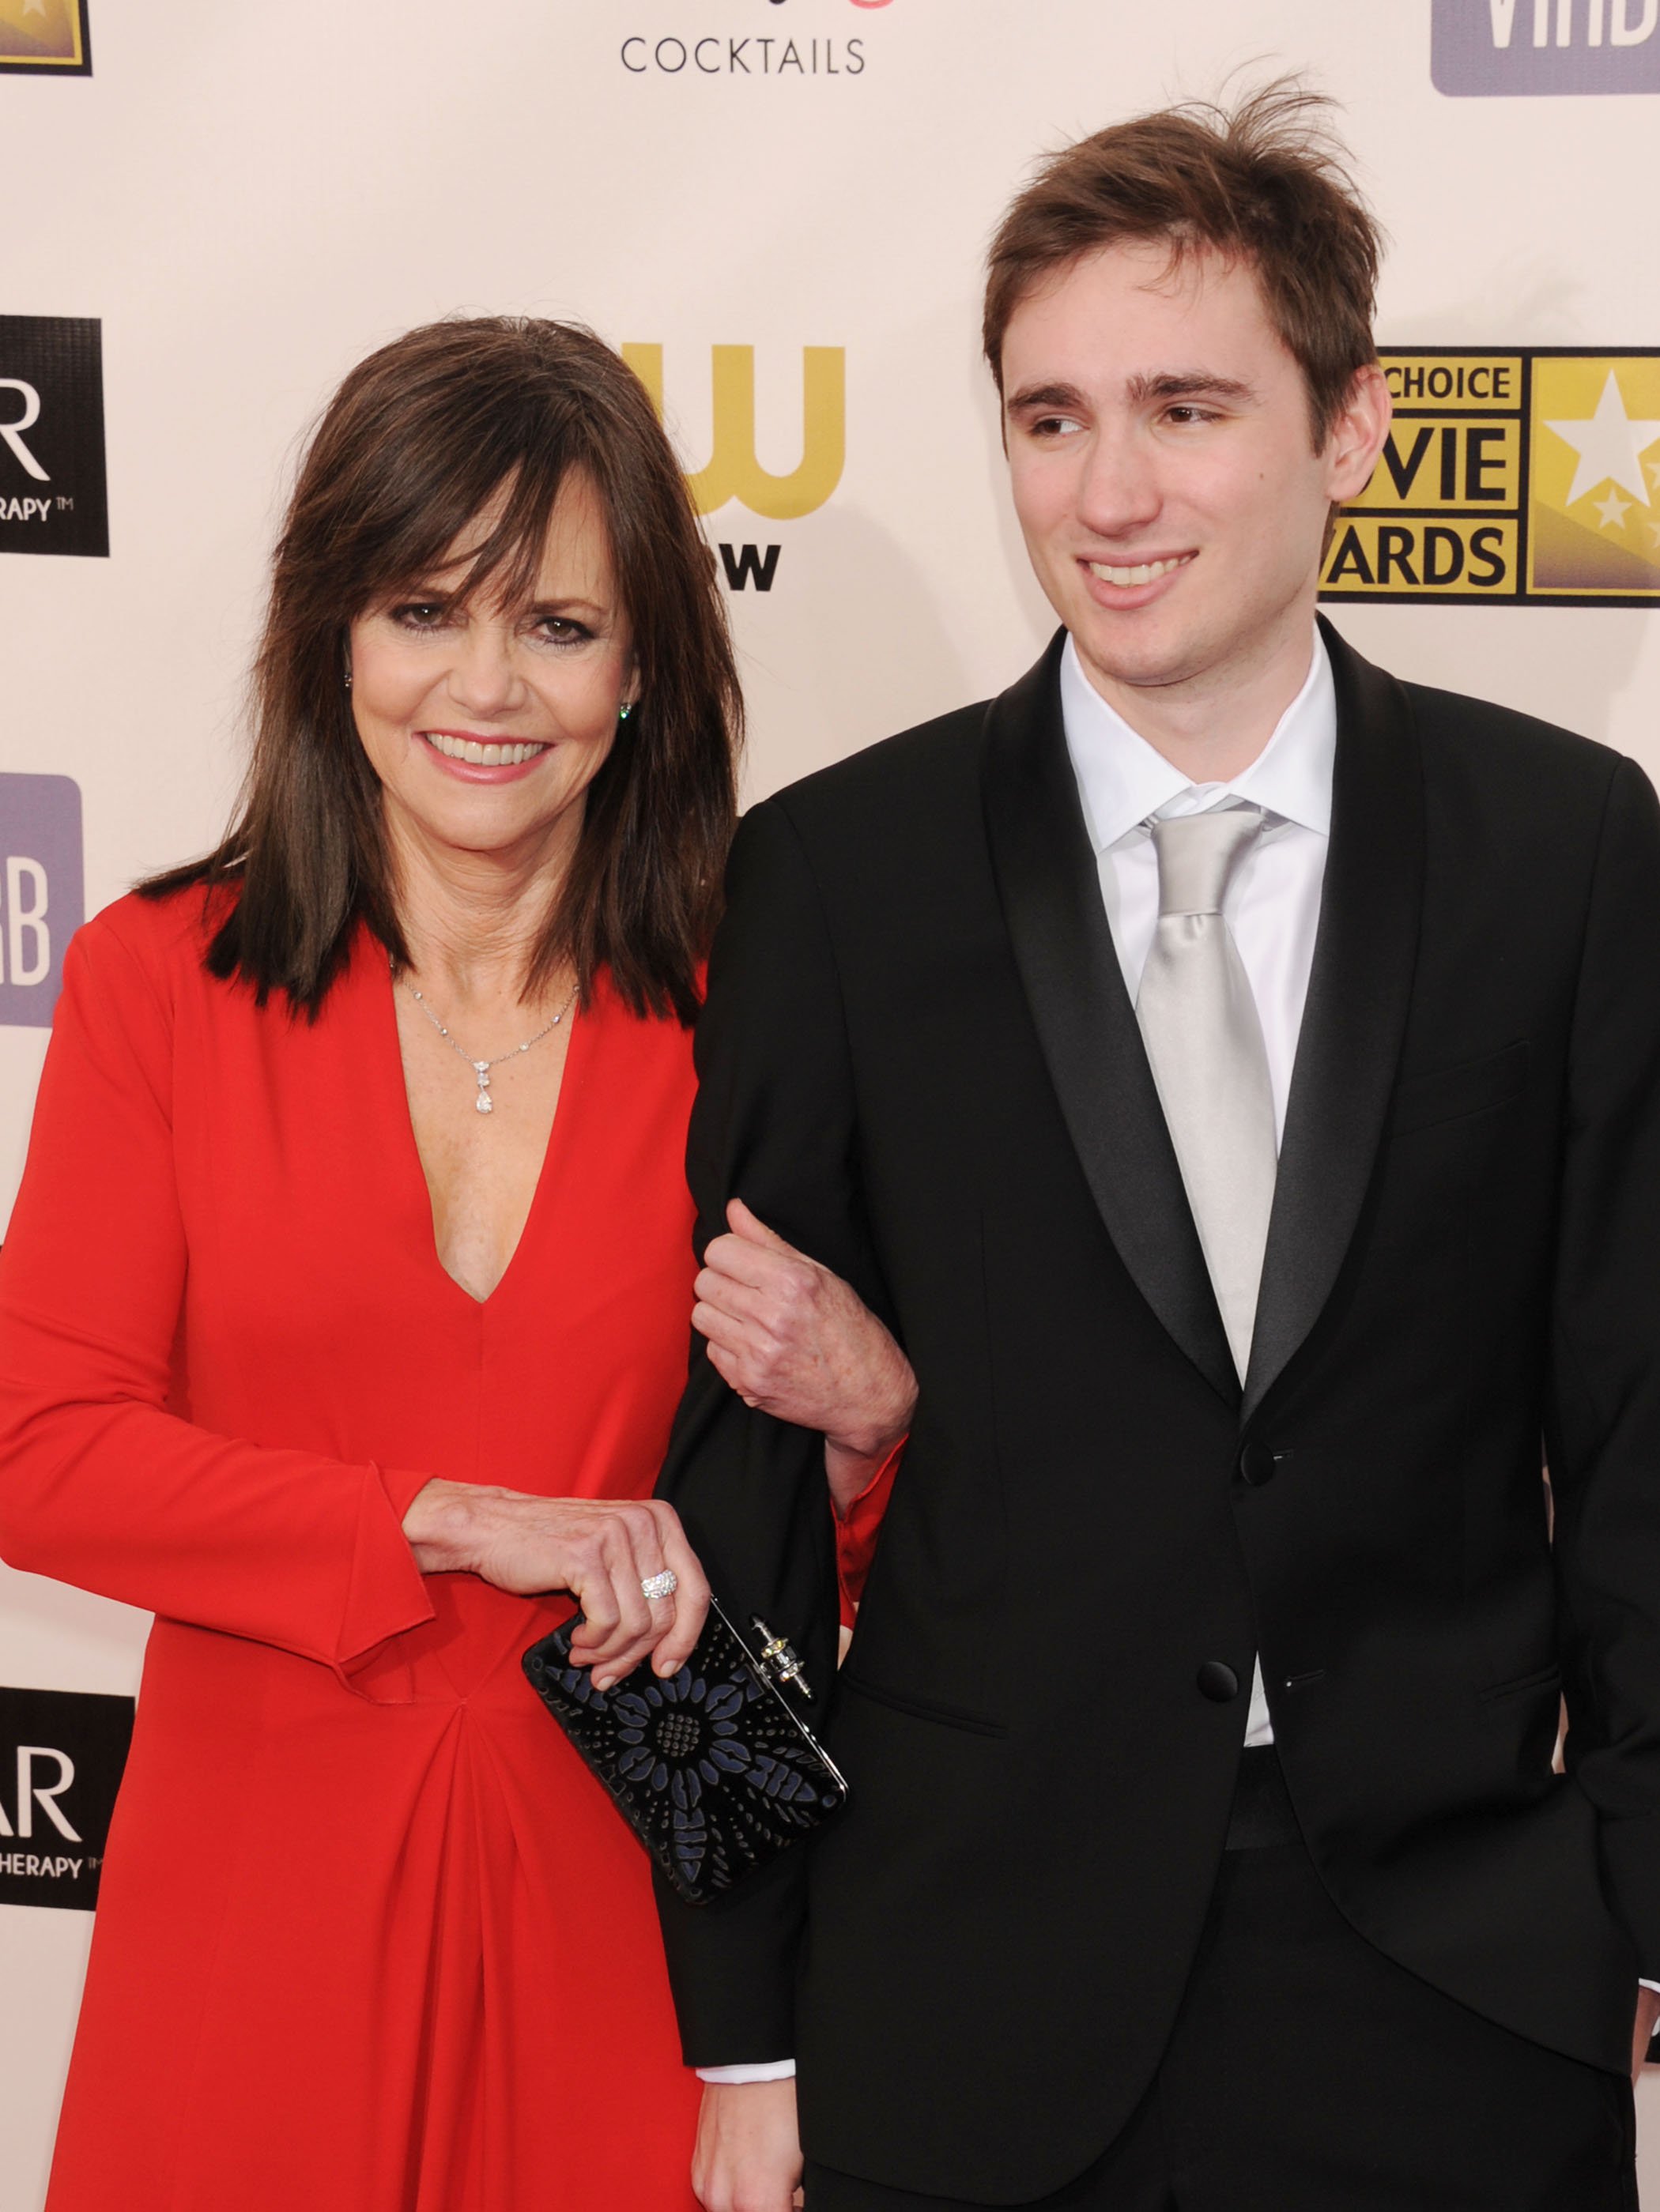 Actress Sally Field and her son Sam Greisman arrive at the 18th Annual Critics' Choice Movie Awards at Barker Hangar on January 10, 2013 in Santa Monica, California.  |  Source: Getty Images